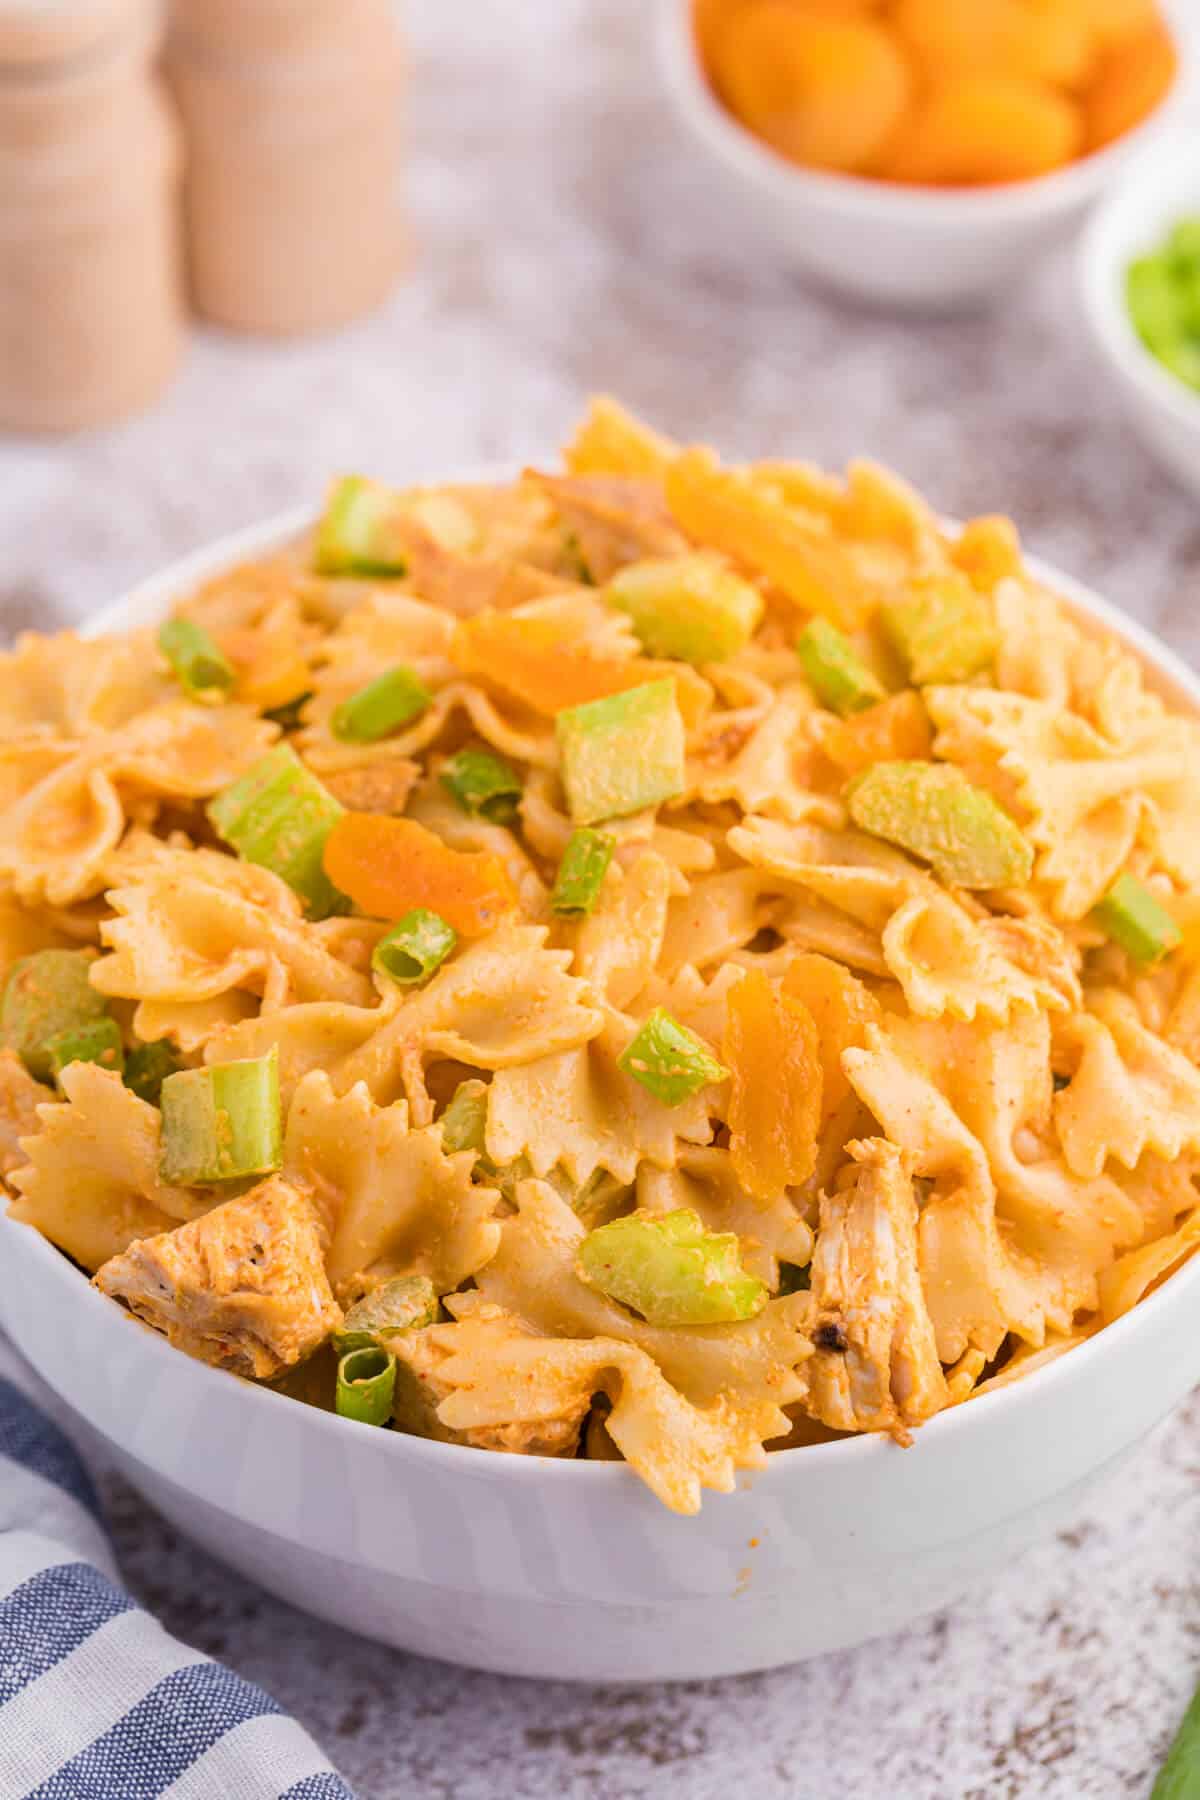 A bowl of creamy curried chicken pasta salad.